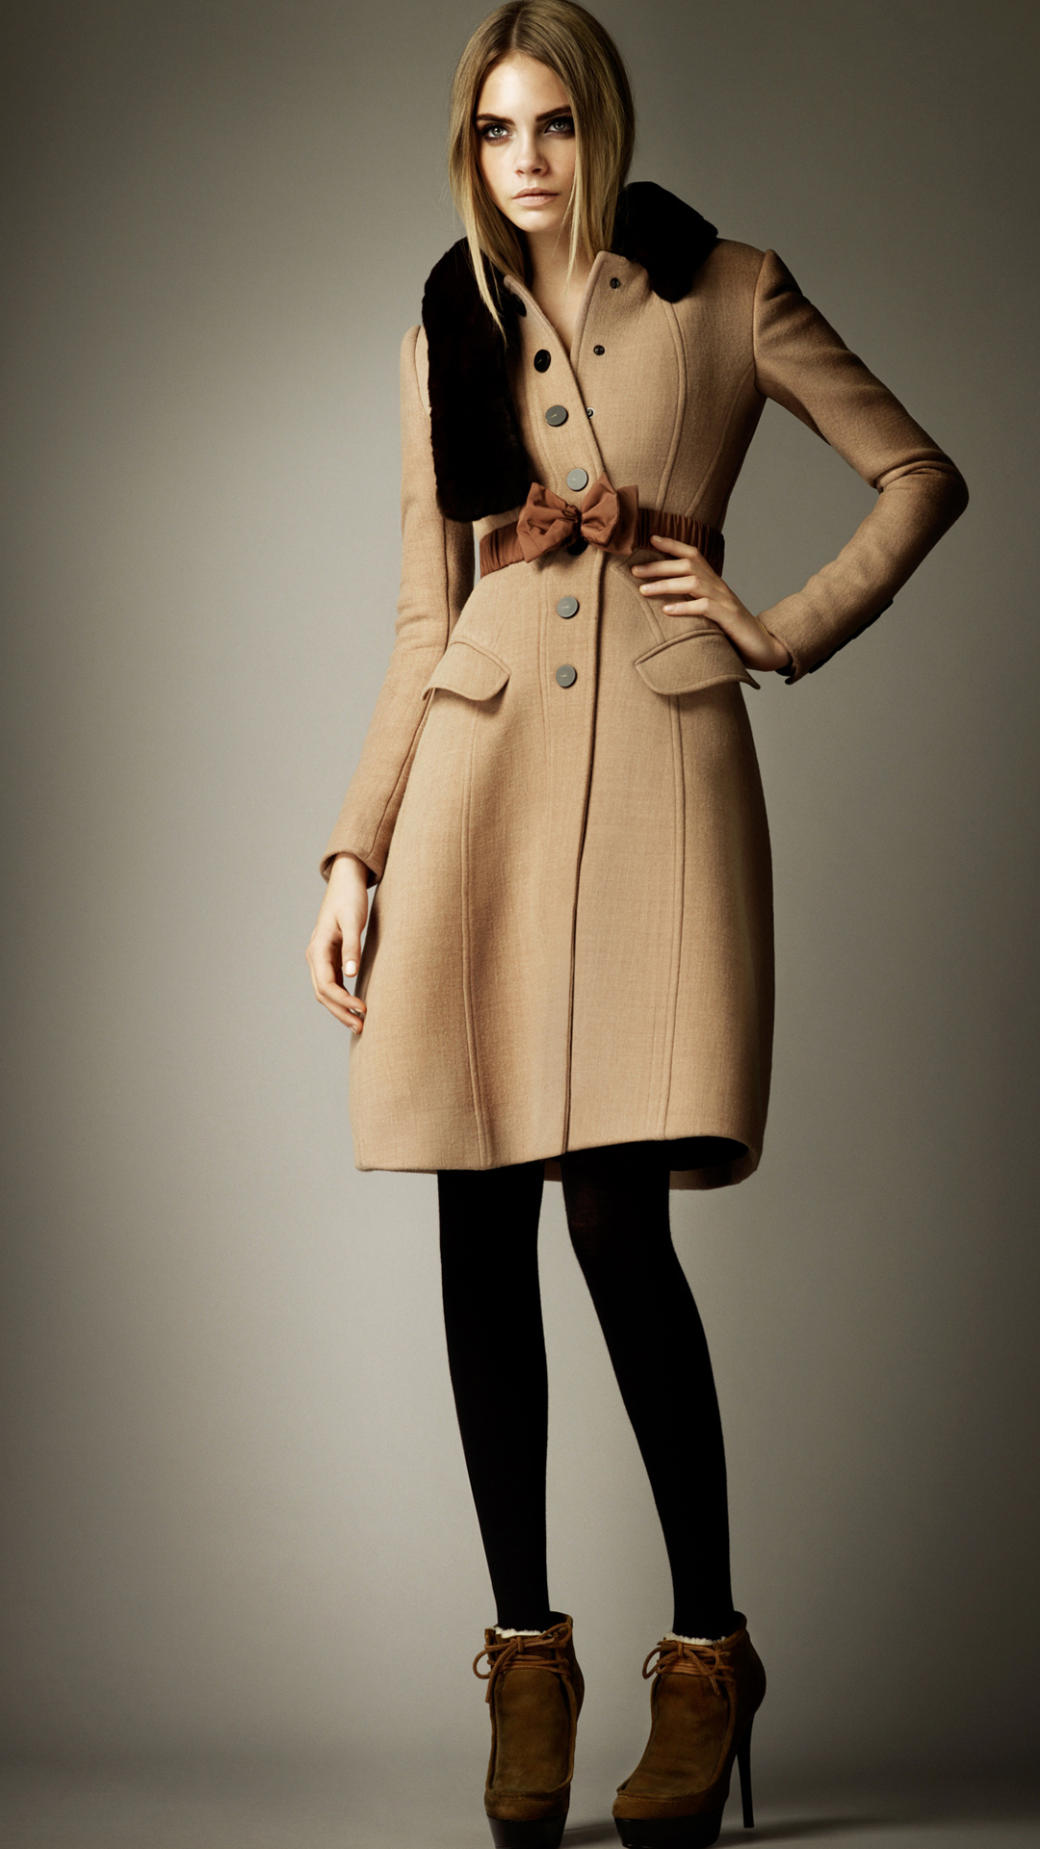 Burberry Prorsum Crêpe Wool Tailored Coat in Natural - Lyst